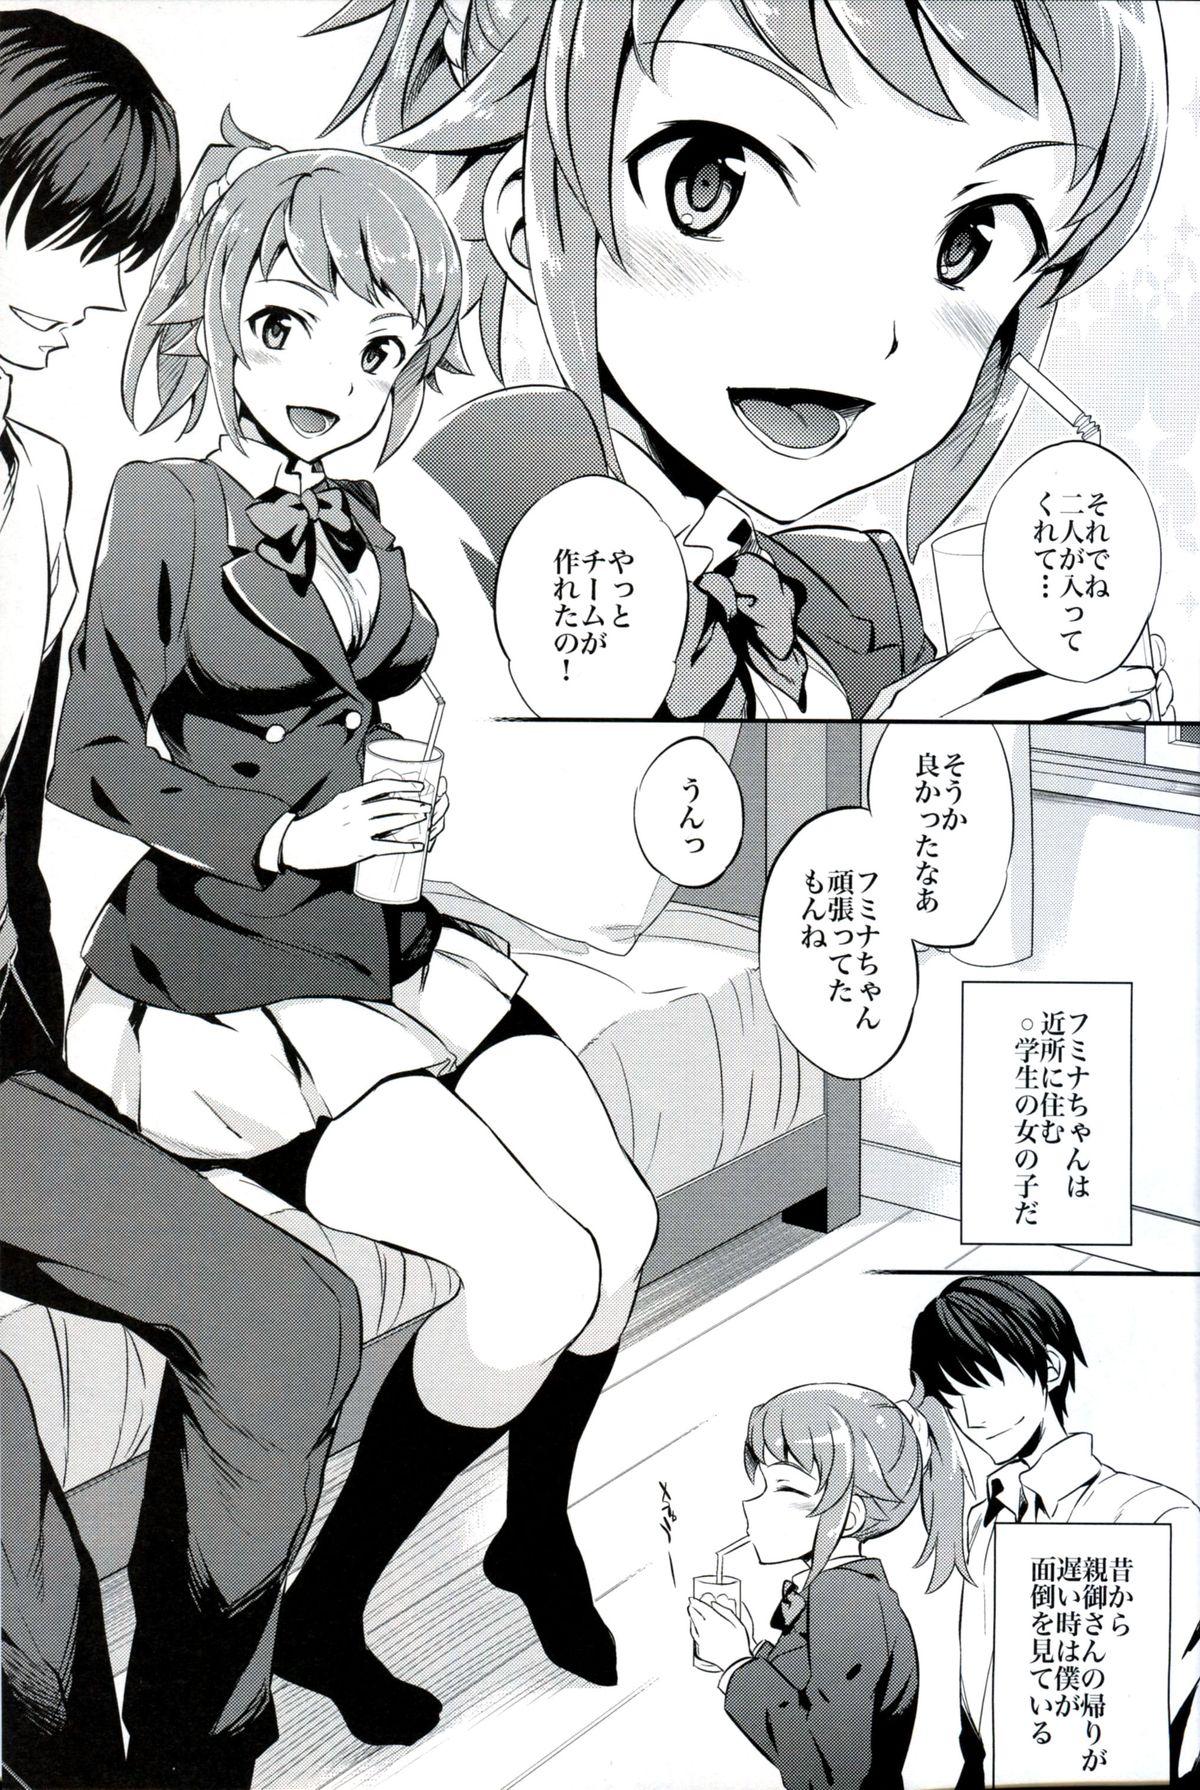 Playing (C87) [Crazy9 (Ichitaka)] C9-15 Fumina-senpai to Mob Onii-chan (Gundam Build Fighters Try) - Gundam build fighters try Big Pussy - Page 4